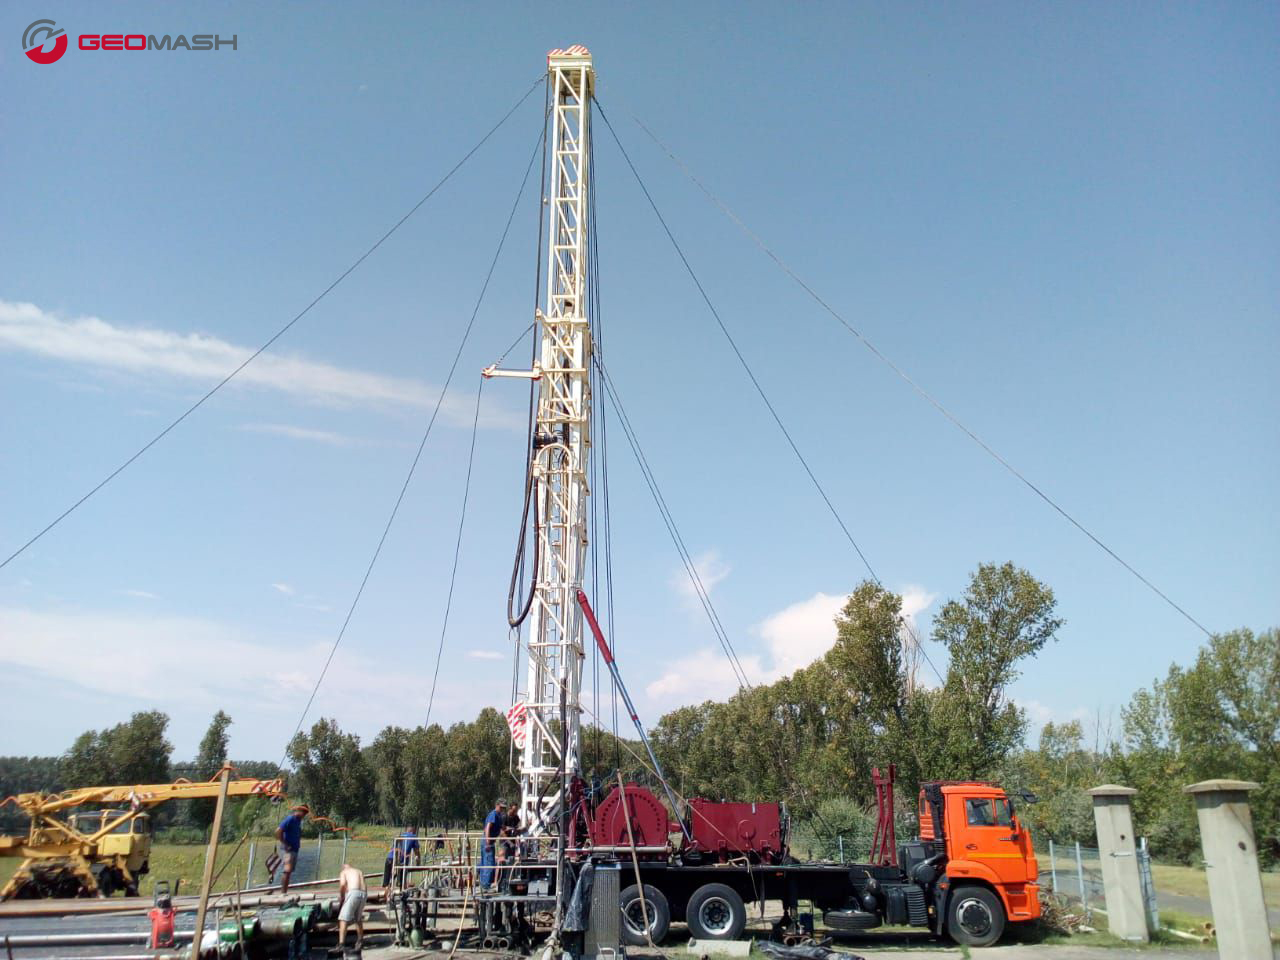 Geomash; Leading manufacturer of water drilling rigs